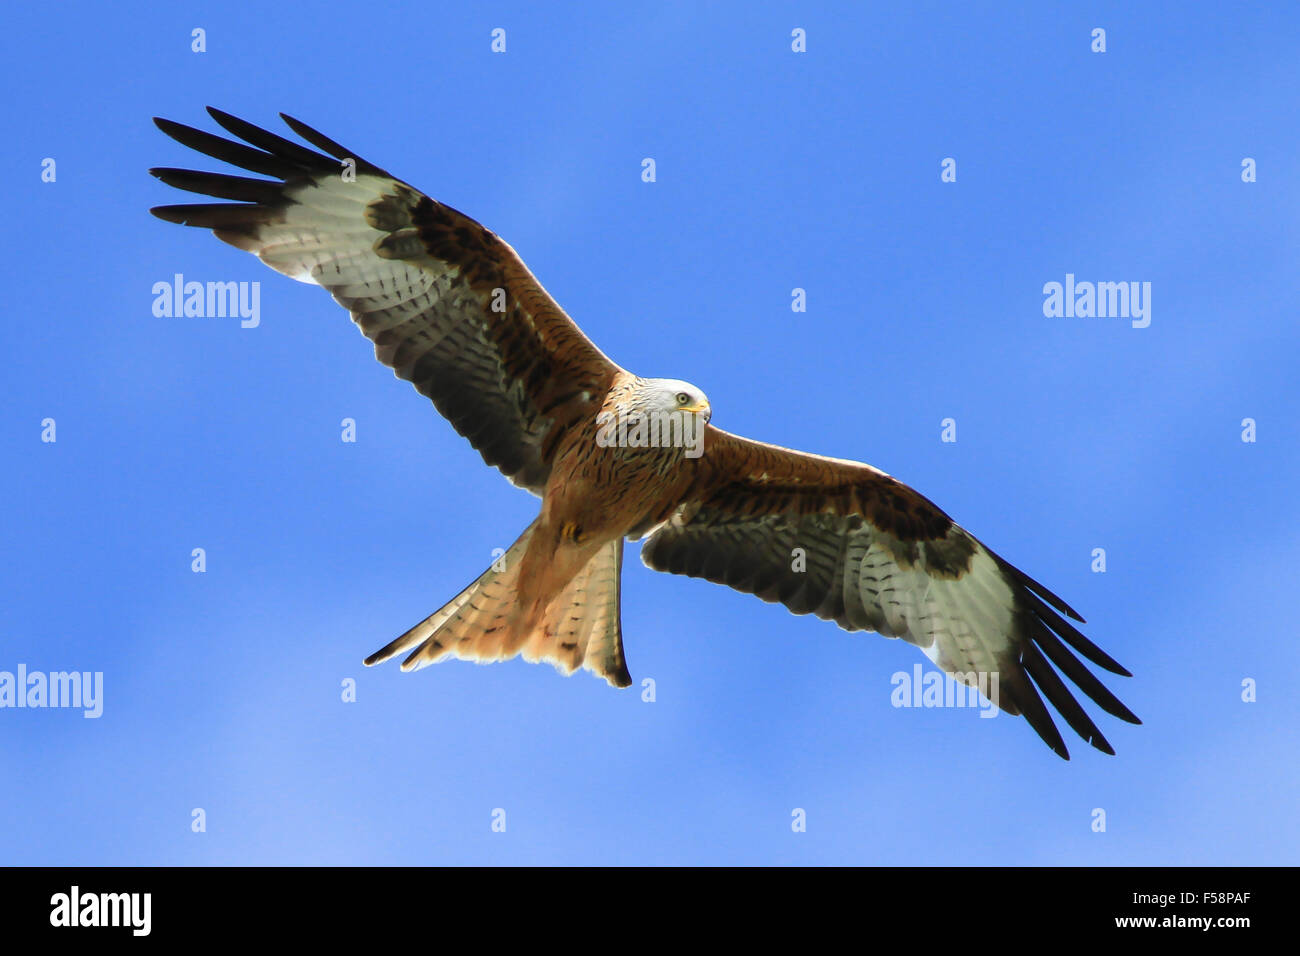 A Red kite soars against a blue summer sky in Dumfries and Galloway, Scotland Stock Photo